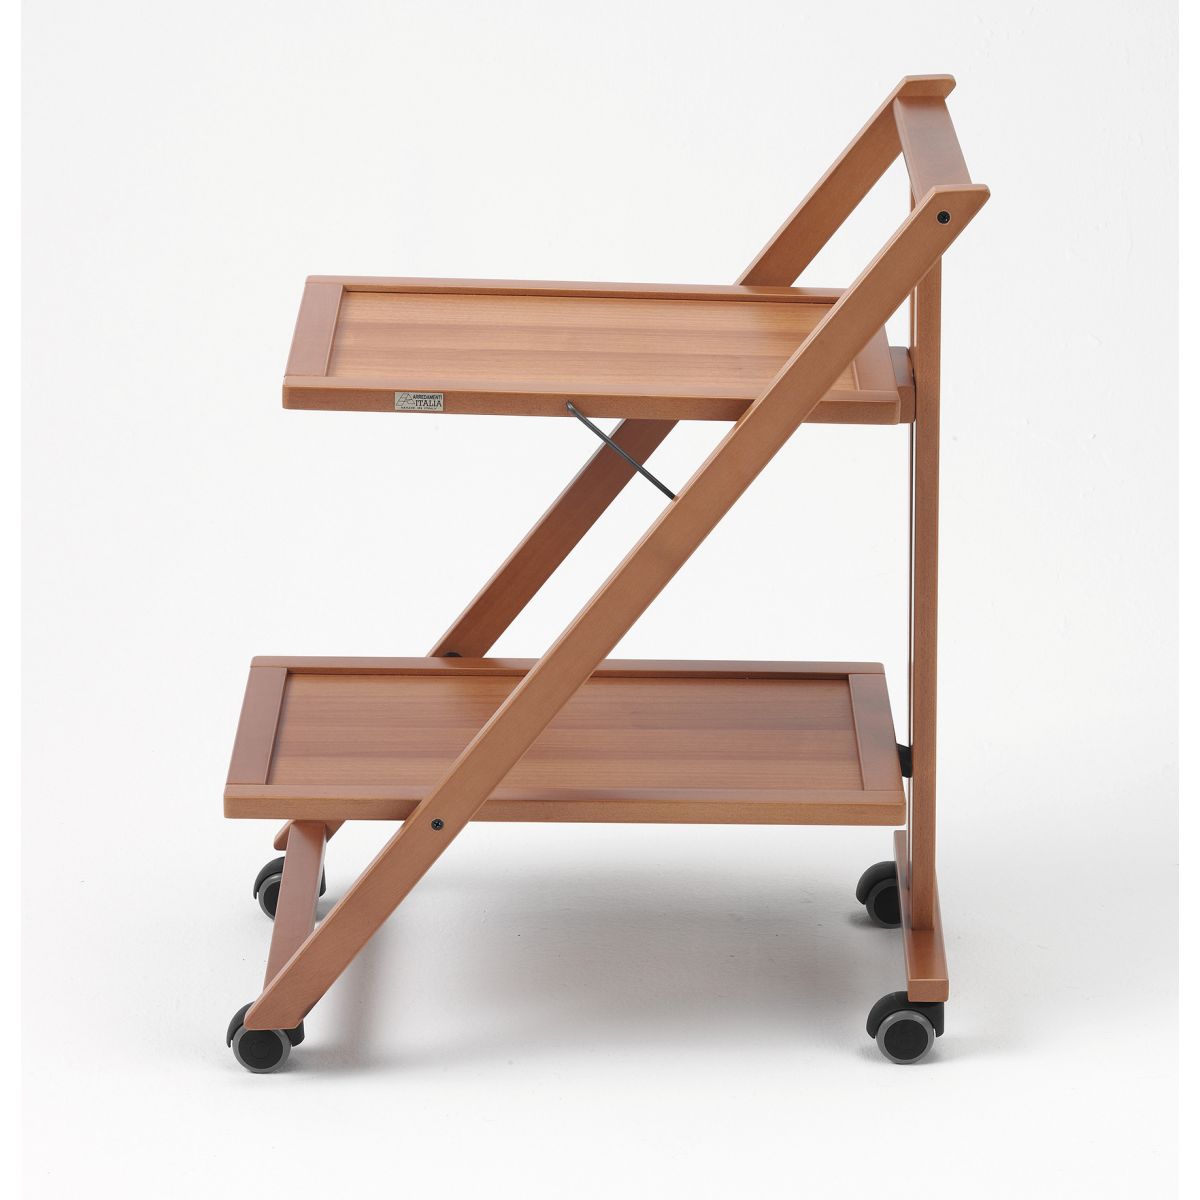 Serving trolley in cherry wood Simpaty